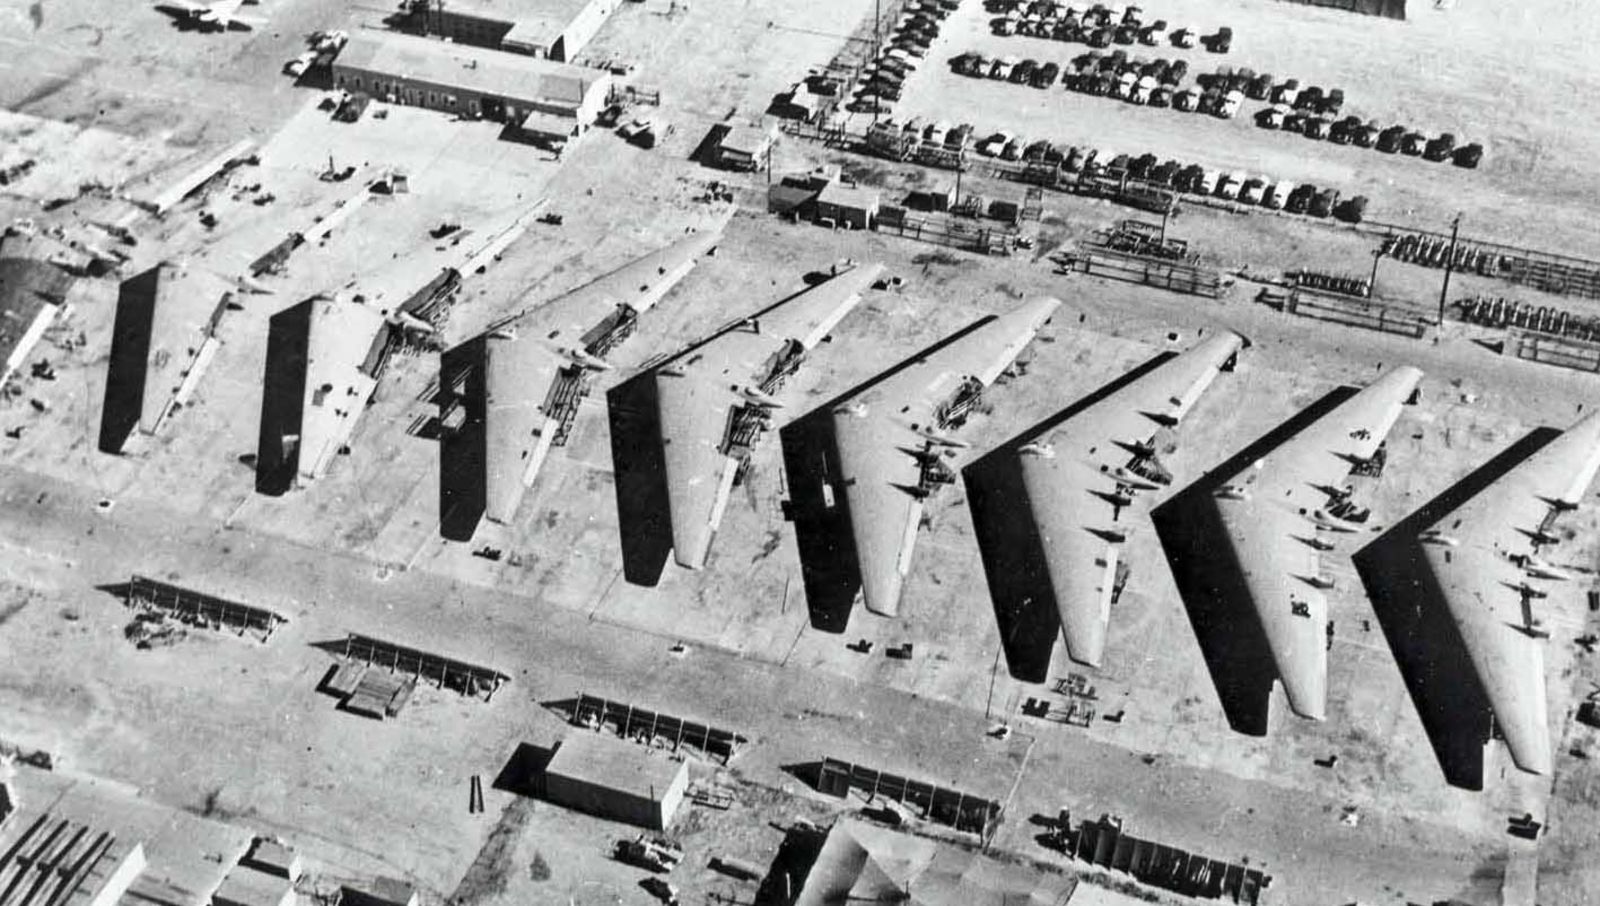 Uncompleted B-35s lined up at Northrop’s California factory awaiting conversion to YB-49. All of these airframes were eventually scrapped. (US Air Force)